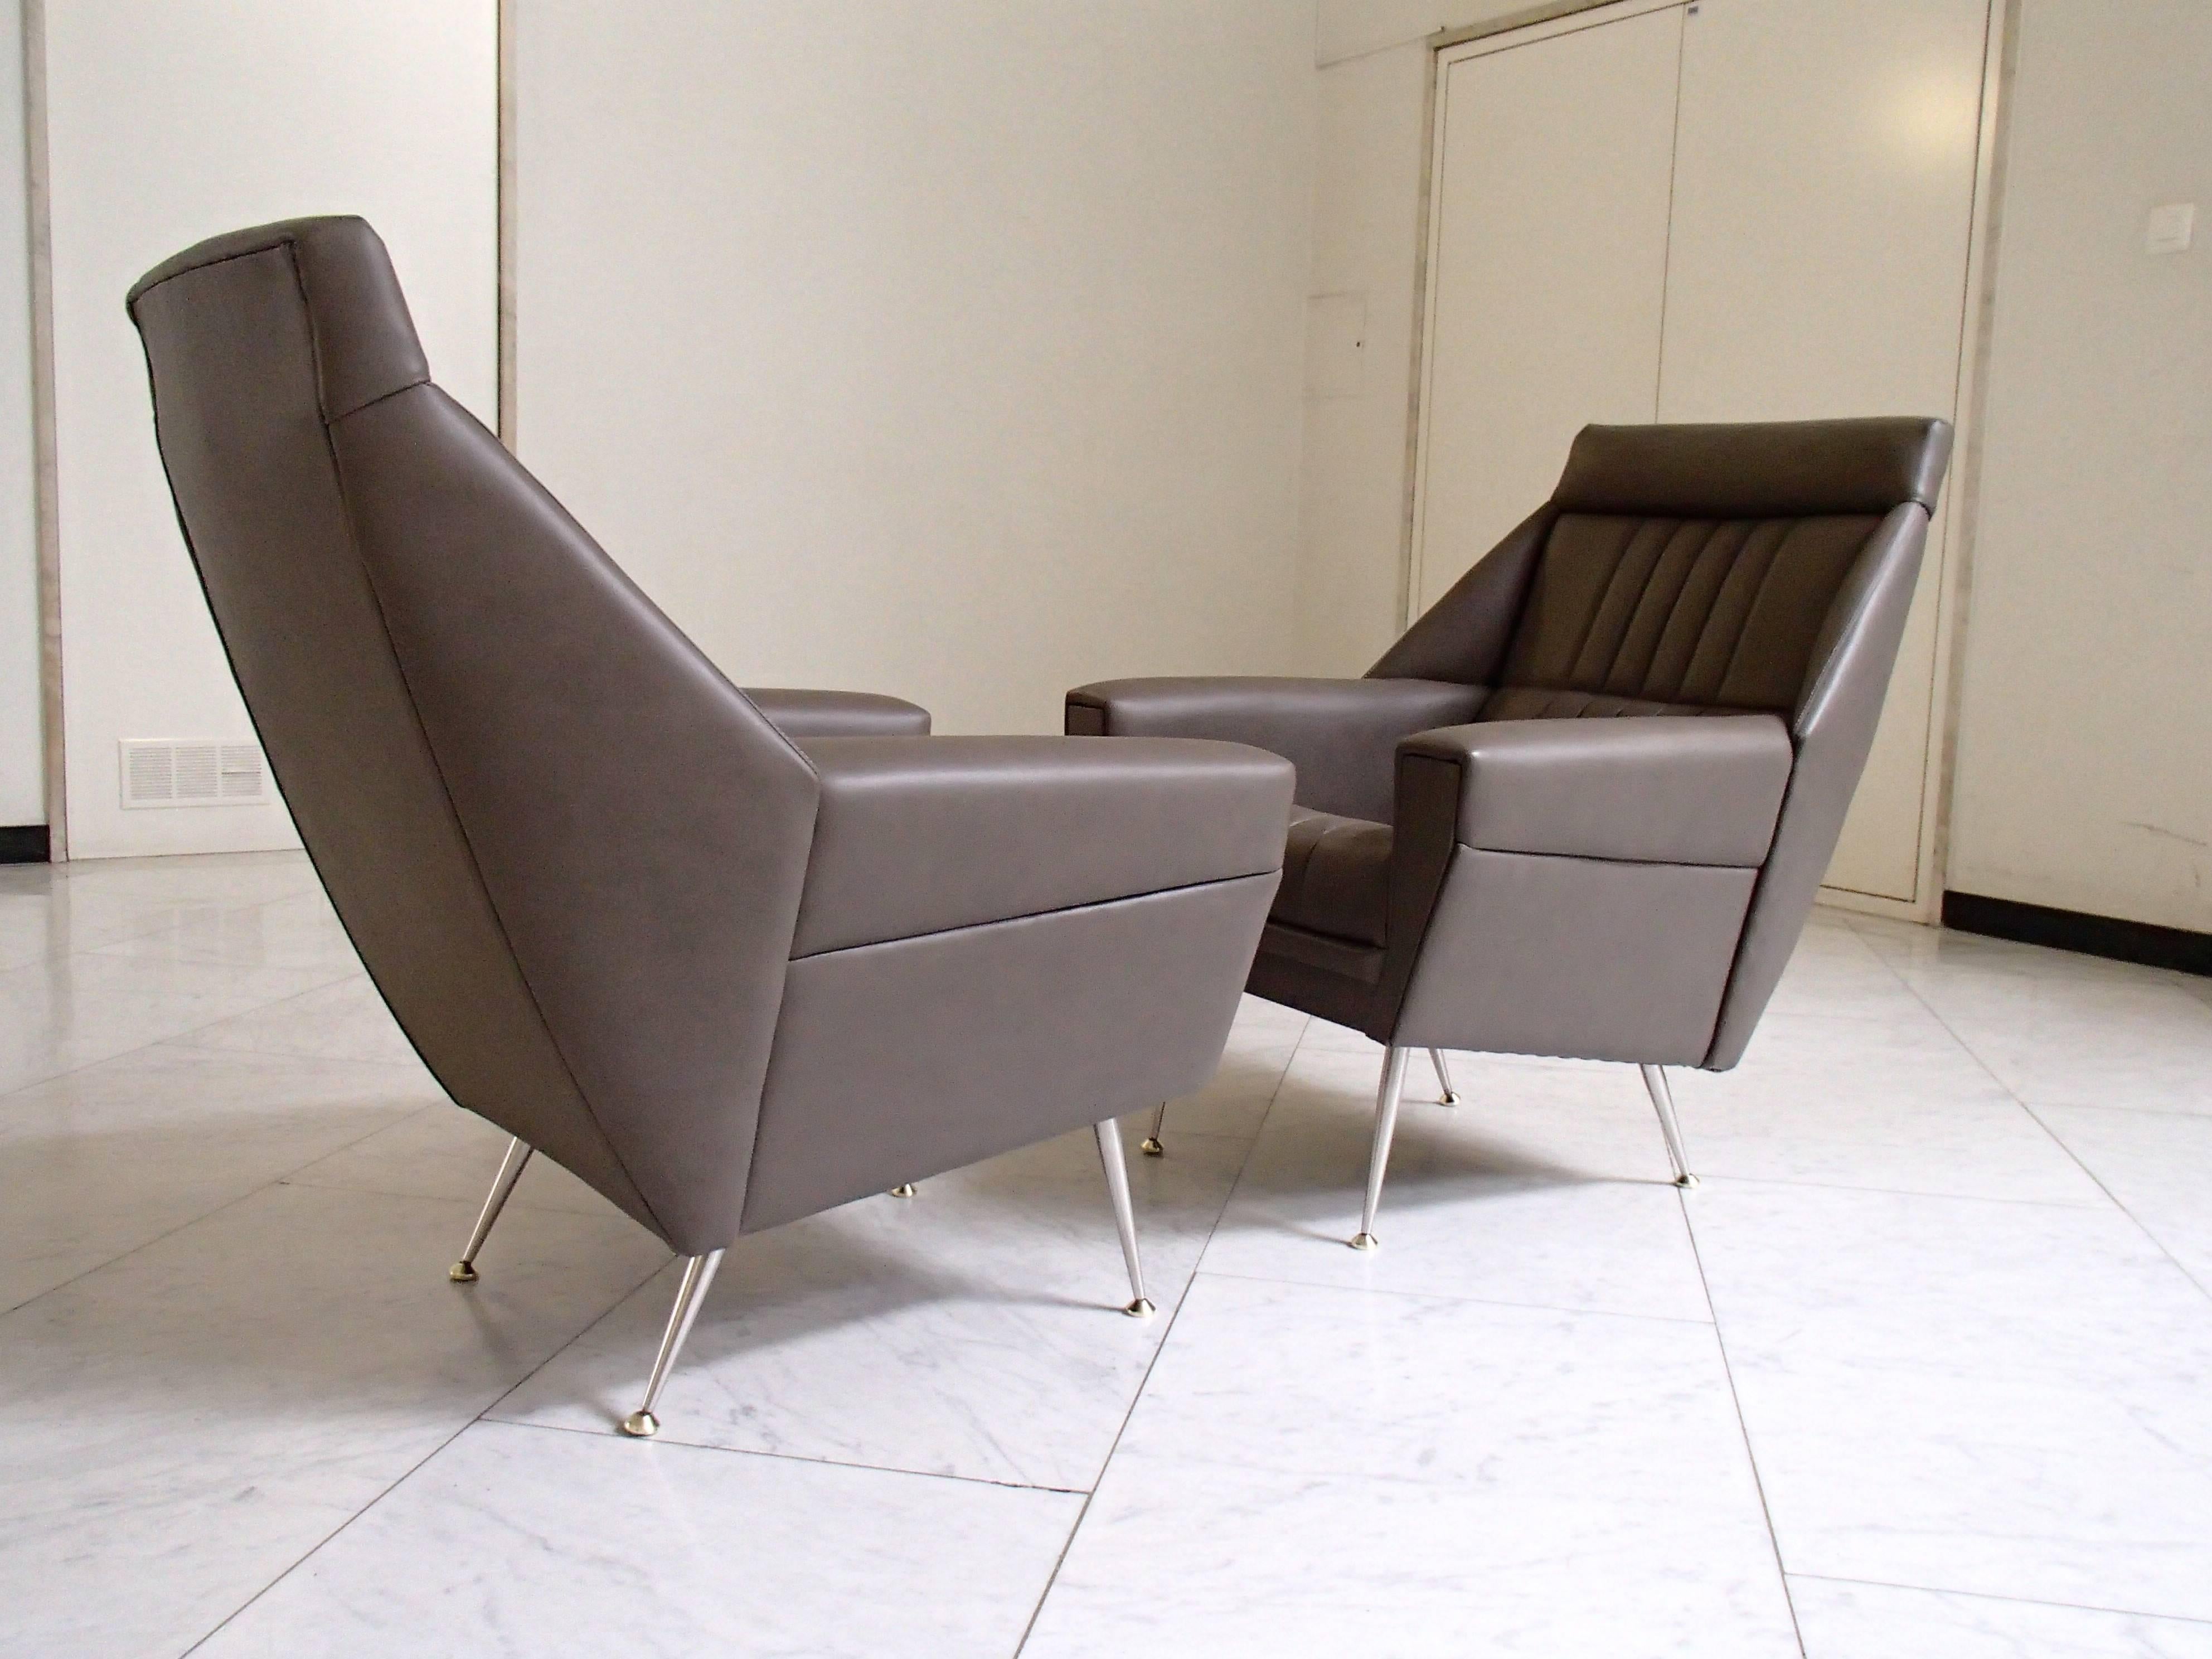 Pair of Mid-Century Modern Armchairs Grey Greenish Leather In Good Condition For Sale In Weiningen, CH